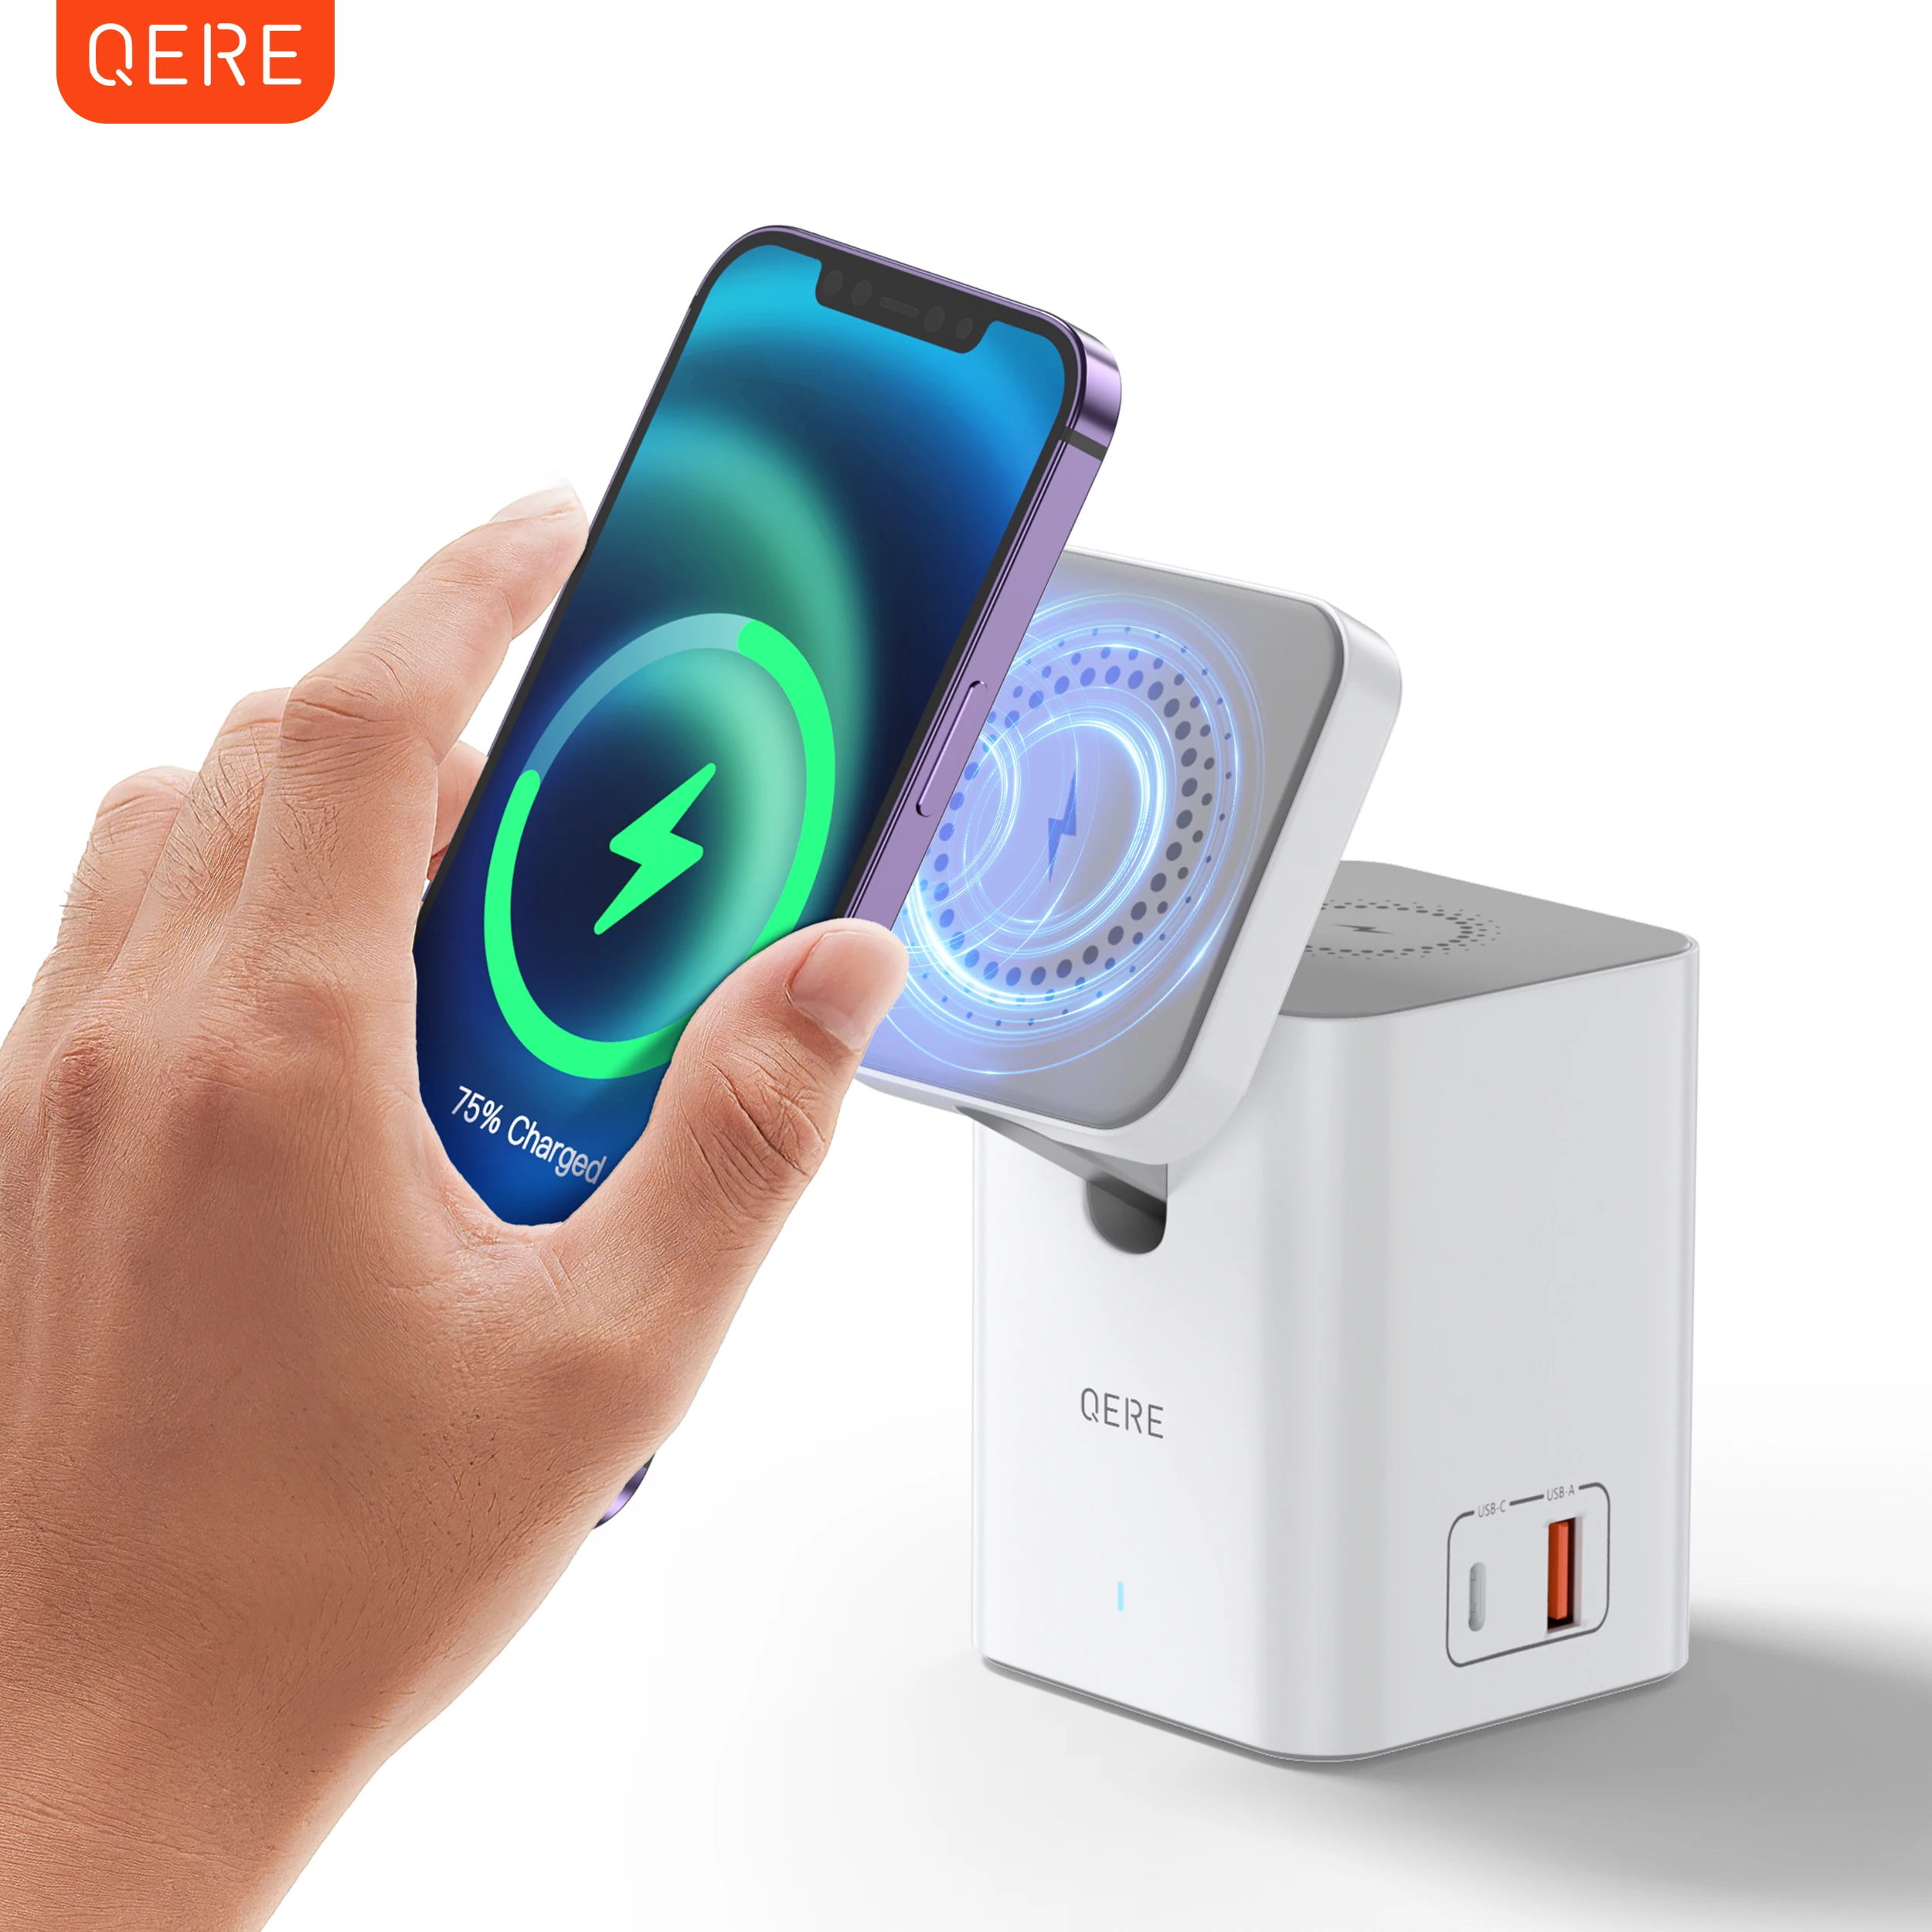 

QERE Mobile Phone Magnetic Wireless Charger Station Fast Charging Safe Multi-functional Portable Foldable Mini Wireless Charger